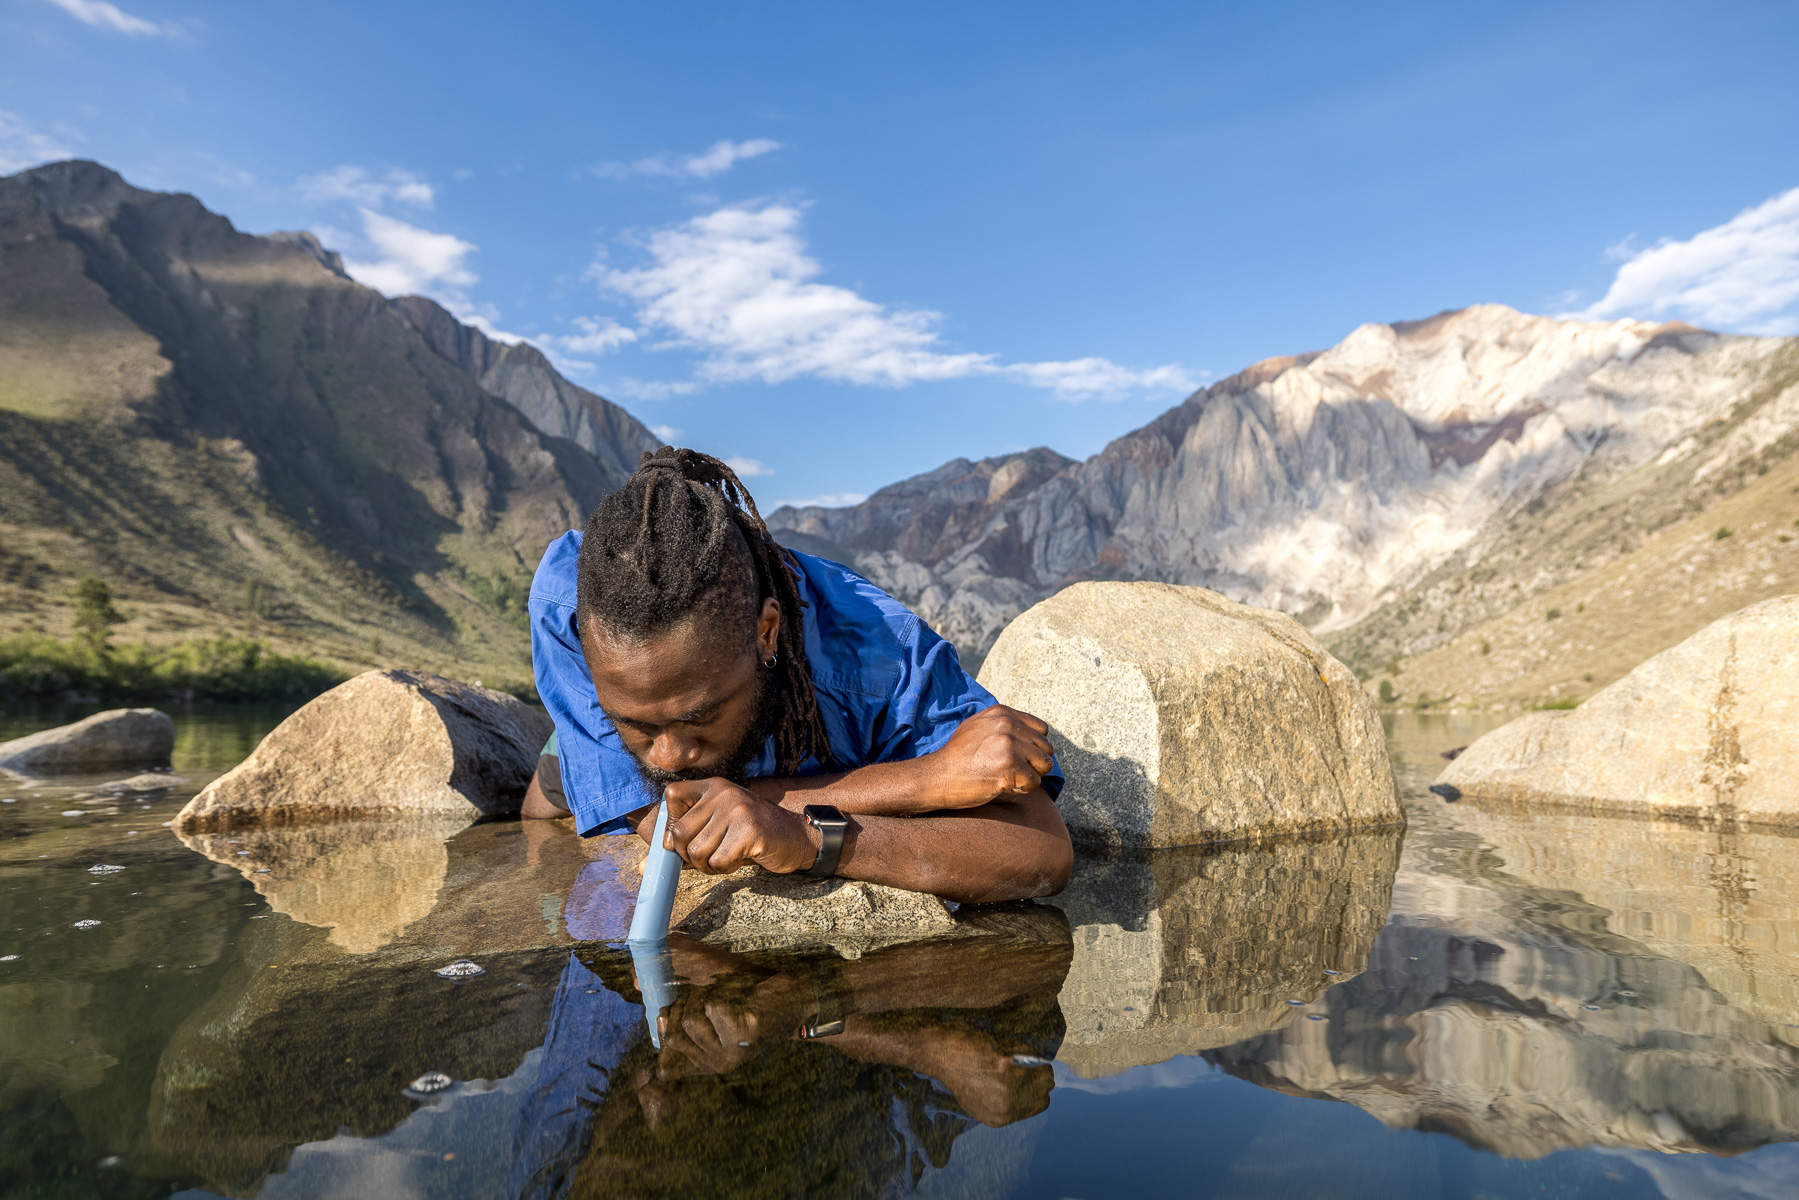 The LifeStraw Go 2 Water Bottle Review